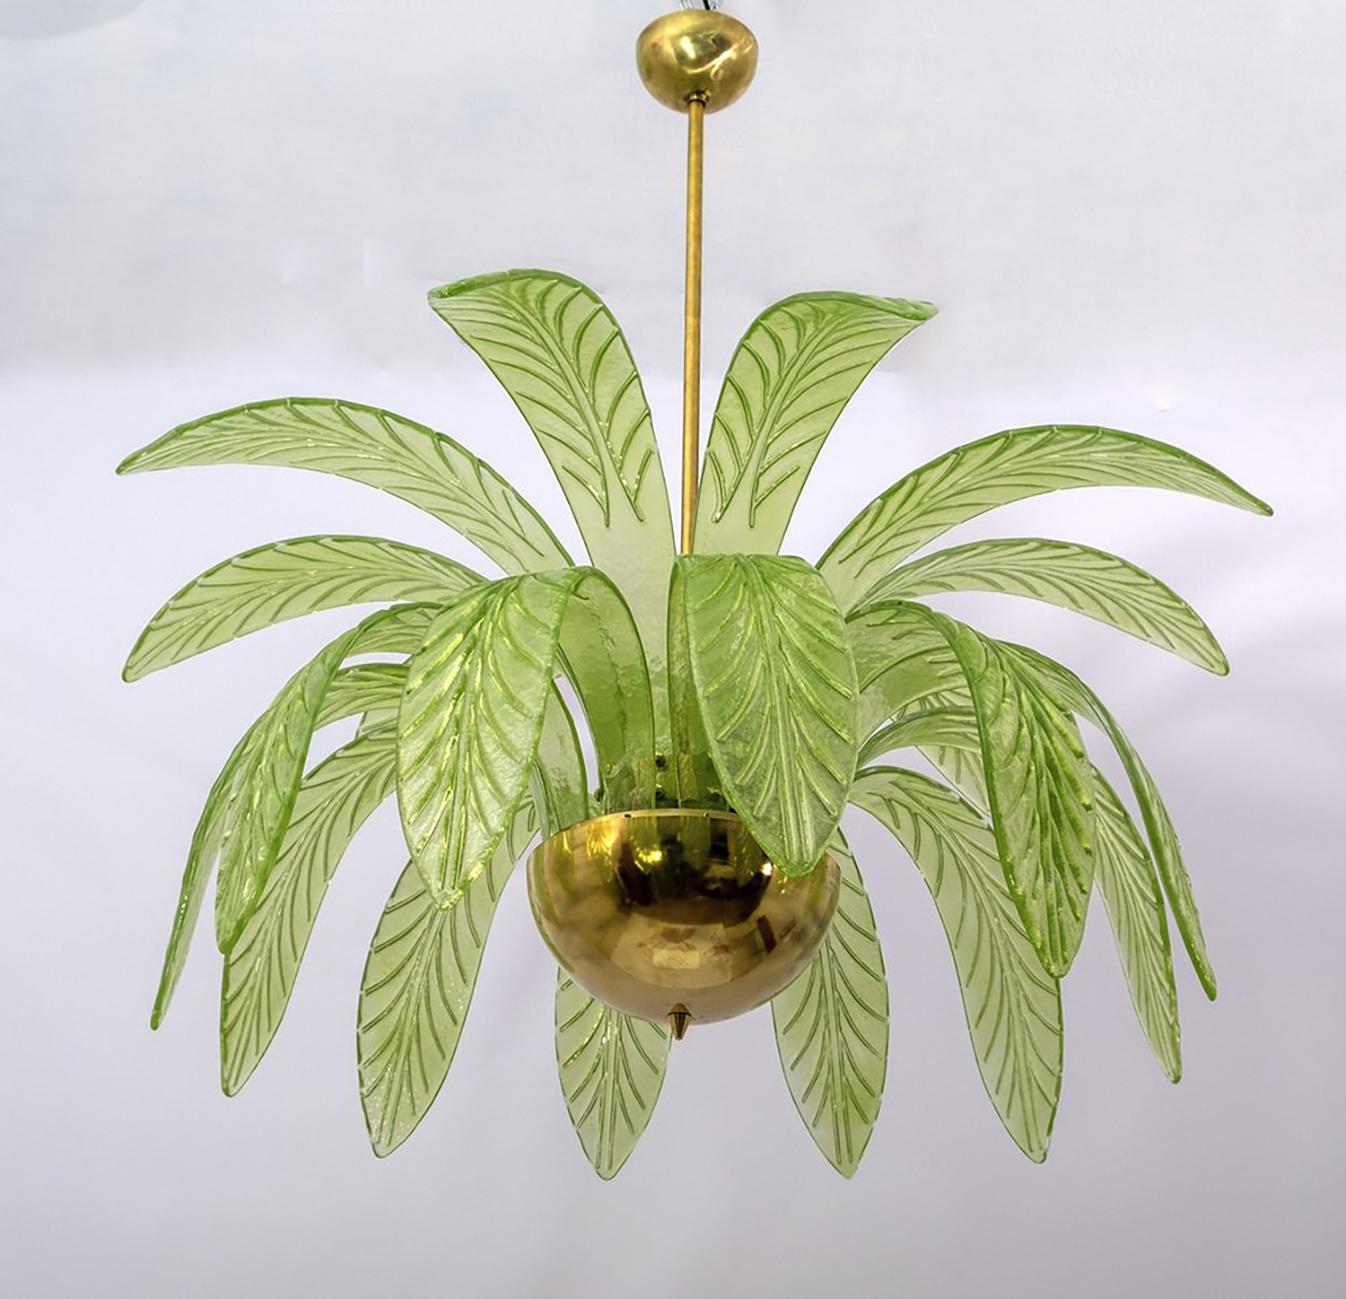 Pair of mouth blown Murano glass chandeliers, each has 20 green Murano glass leaves, brass structure, three bulbs.
The chandelier reproduces the crown of a palm tree.
We supply reducers for USA E12 bulbs.